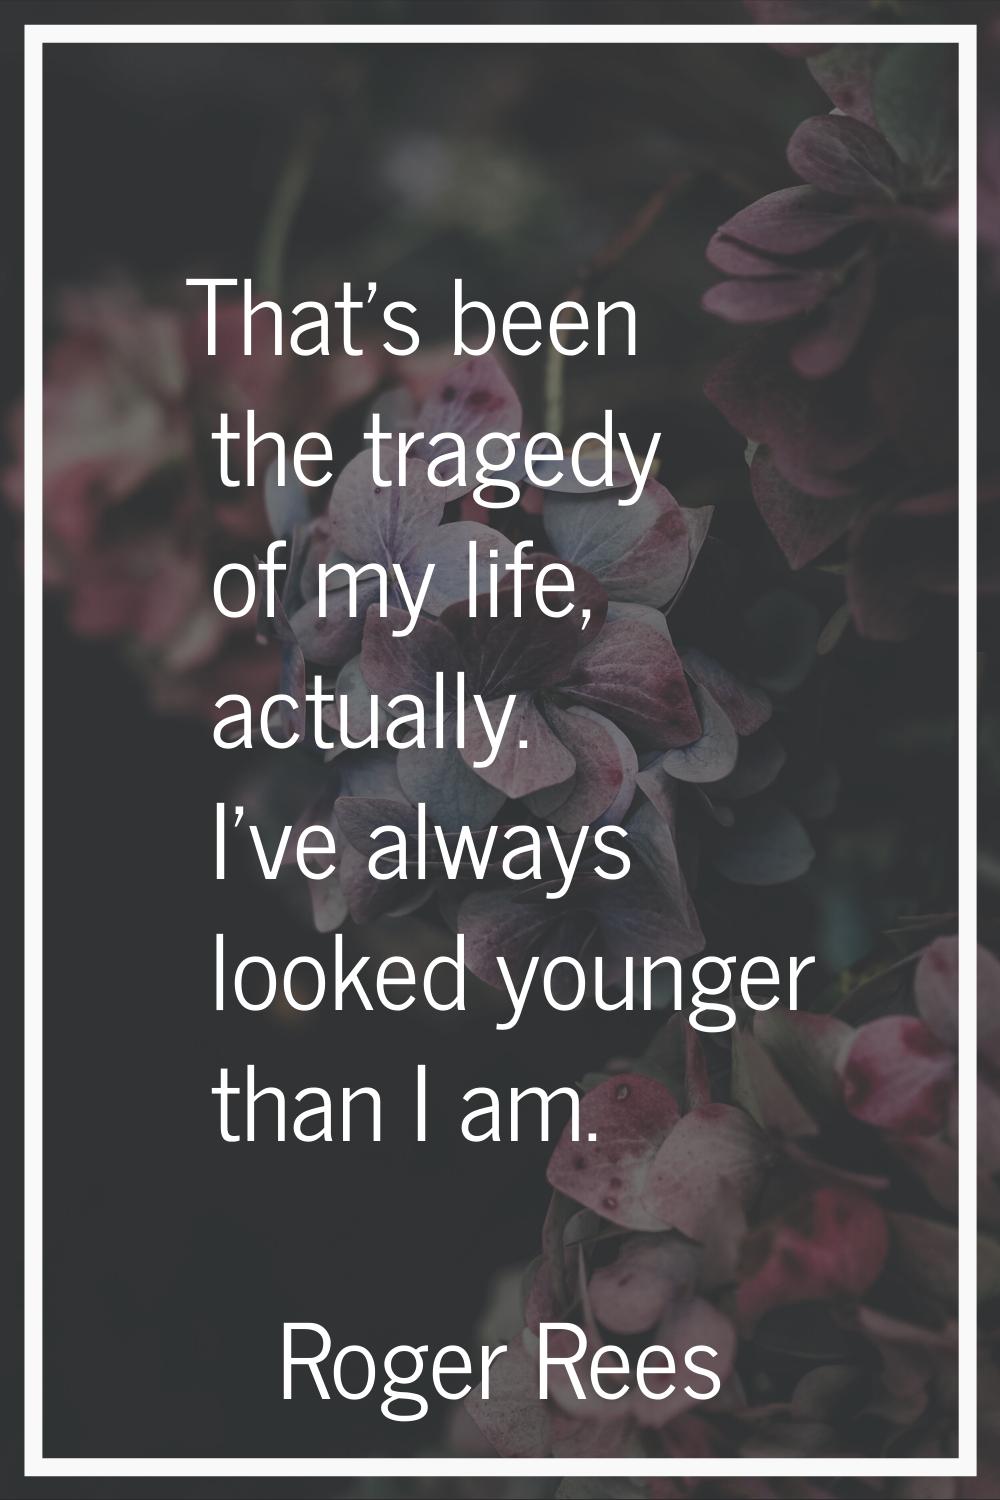 That's been the tragedy of my life, actually. I've always looked younger than I am.